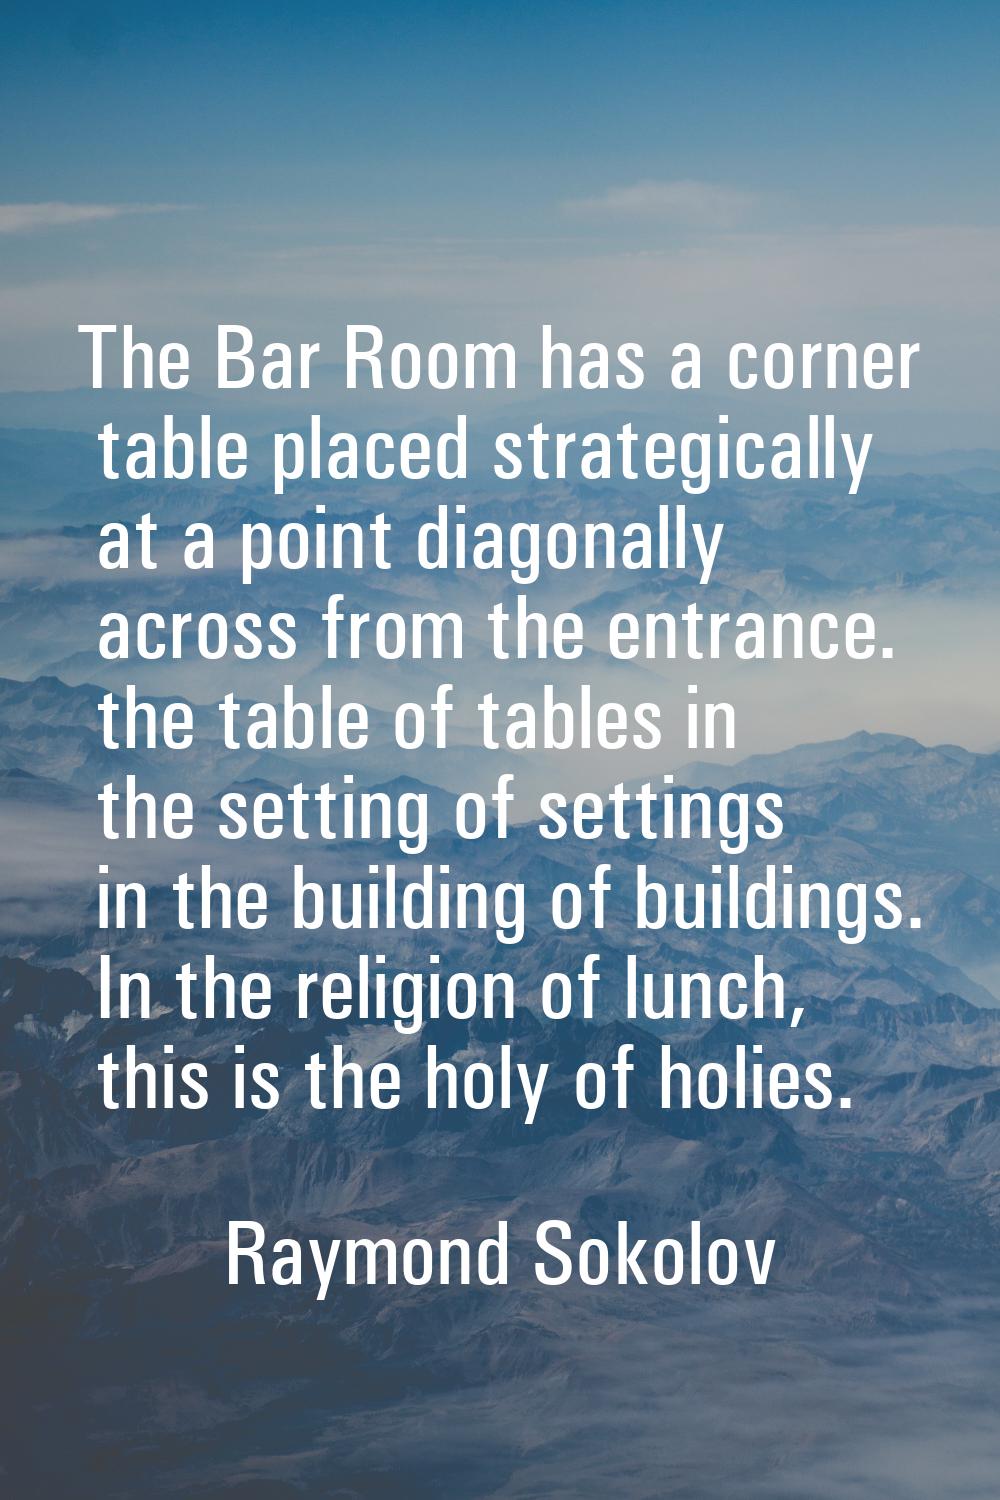 The Bar Room has a corner table placed strategically at a point diagonally across from the entrance